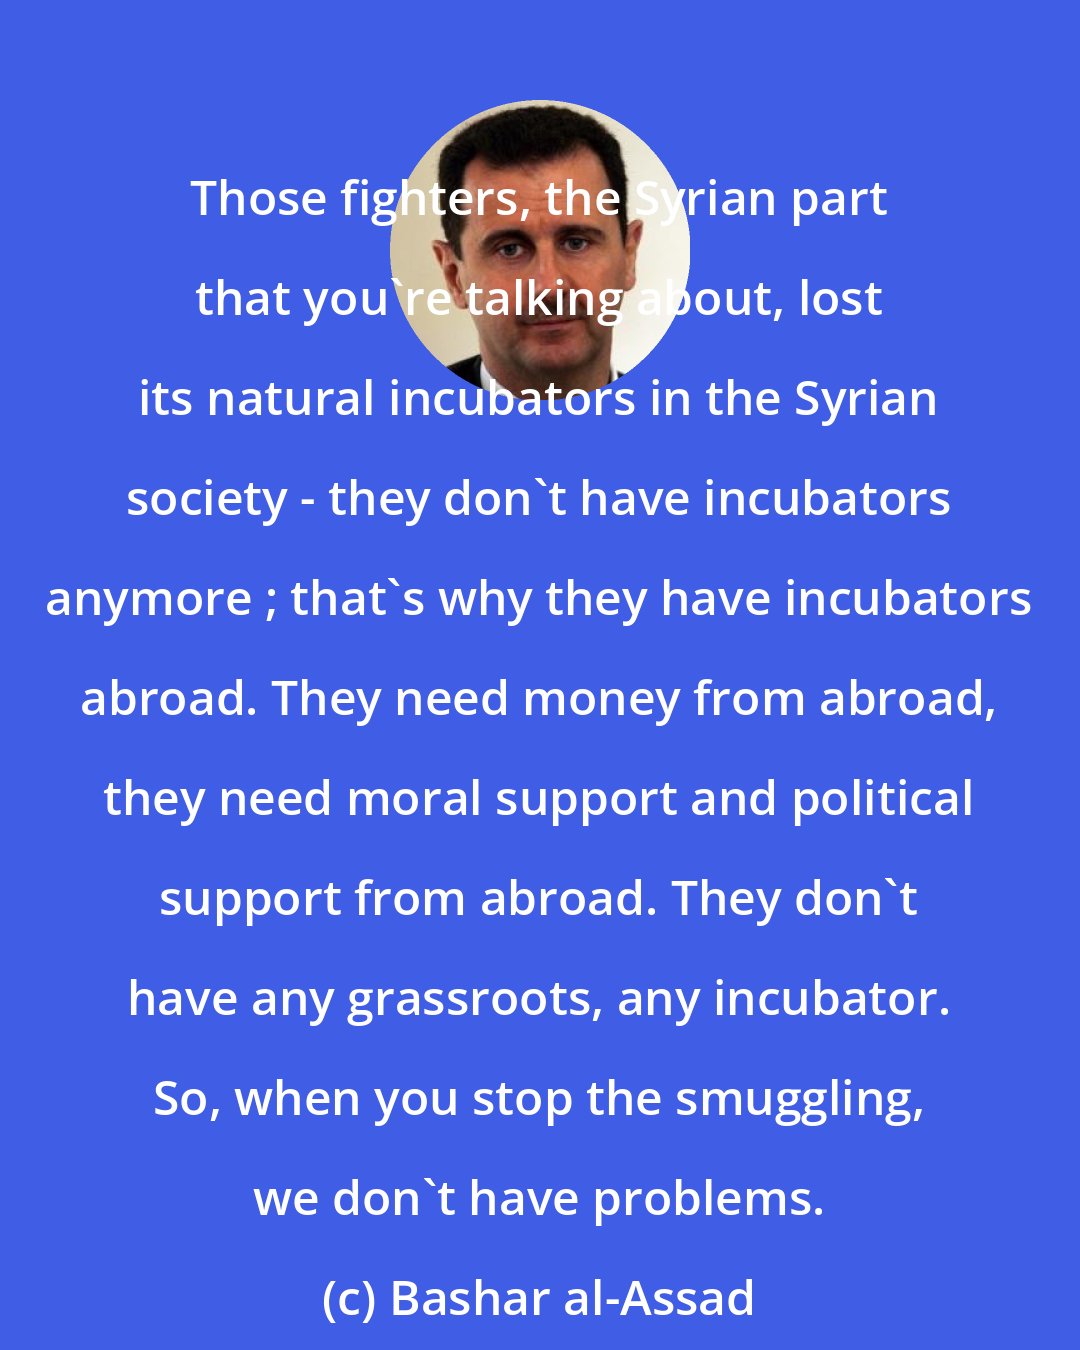 Bashar al-Assad: Those fighters, the Syrian part that you're talking about, lost its natural incubators in the Syrian society - they don't have incubators anymore ; that's why they have incubators abroad. They need money from abroad, they need moral support and political support from abroad. They don't have any grassroots, any incubator. So, when you stop the smuggling, we don't have problems.